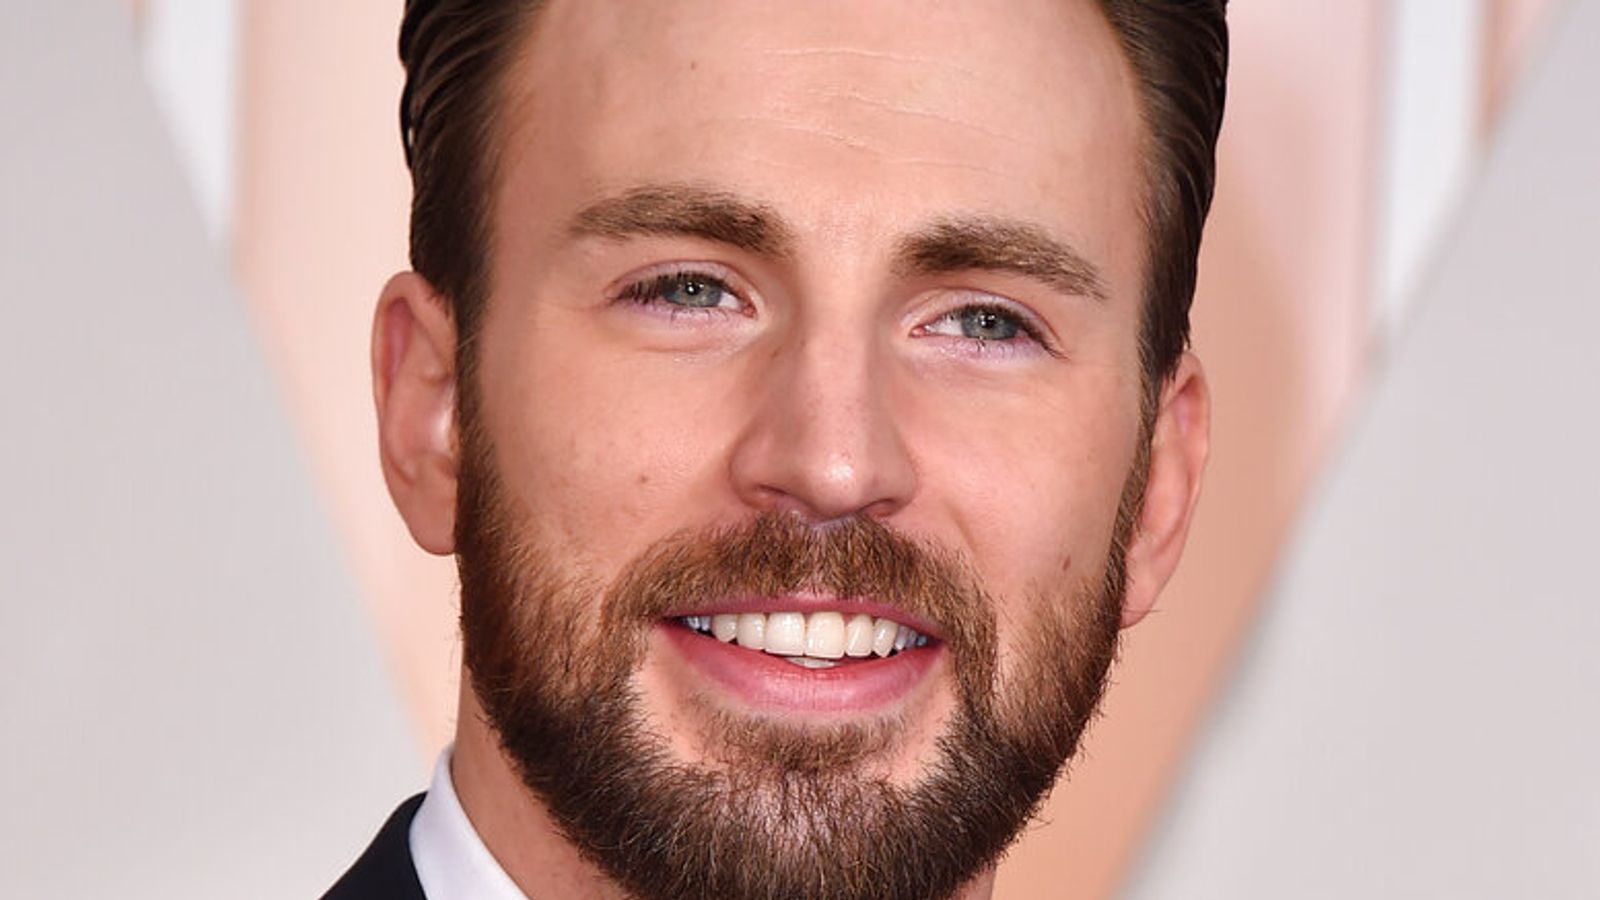 Captain America star Chris Evans marries actress Alba Baptista in at-home ceremony